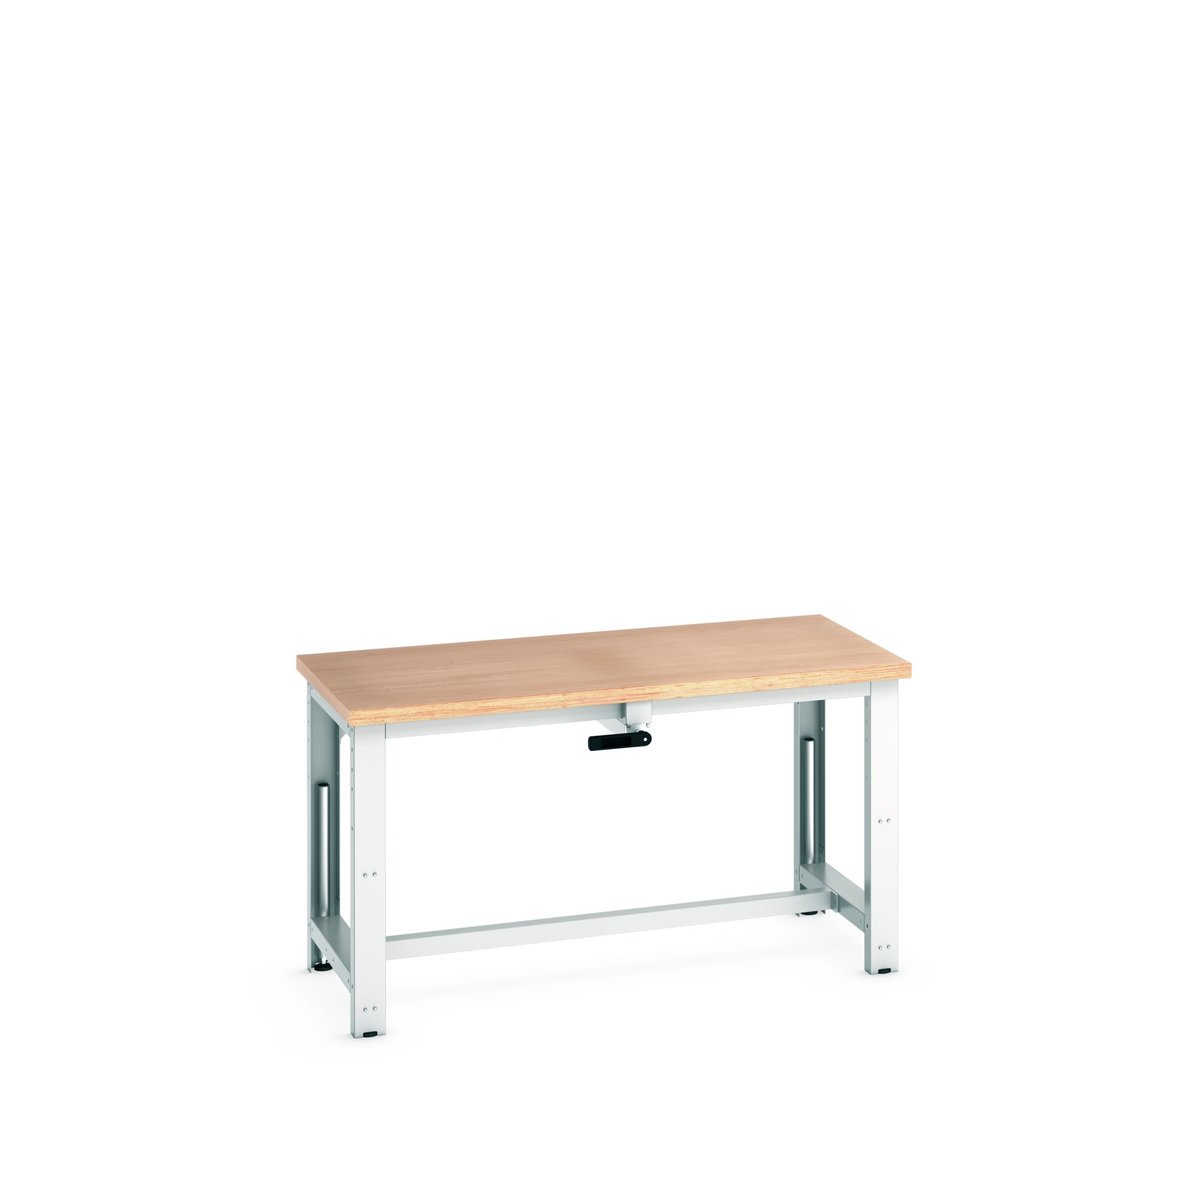 41003574.16 - cubio stepless adjustable height bench